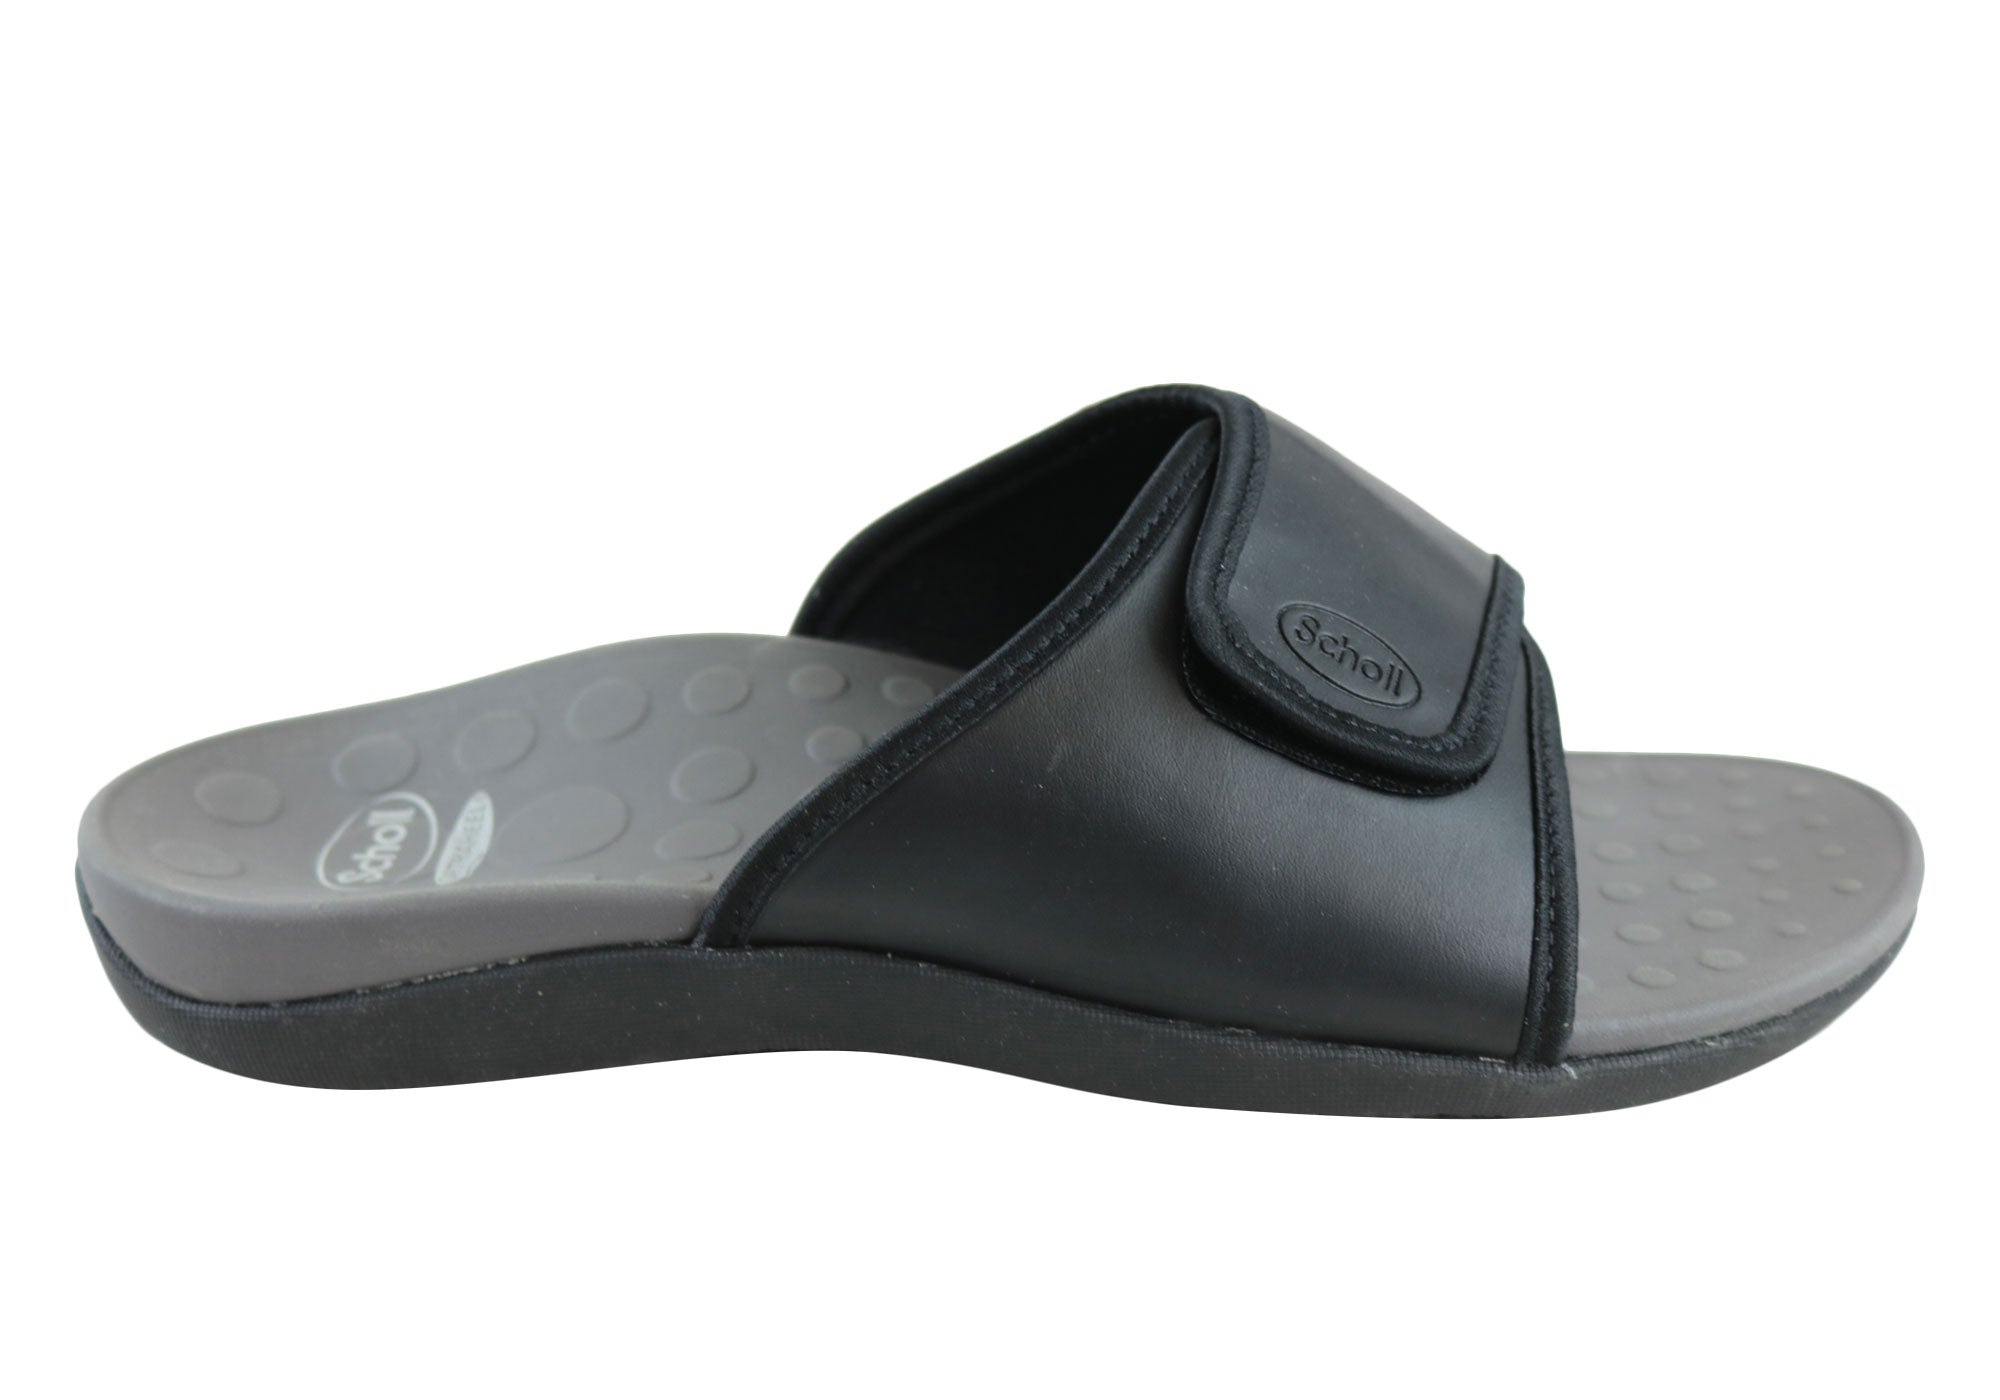 NEW SCHOLL ORTHAHEEL SPORTS II MENS COMFORT ORTHOTIC SLIDES WITH ...